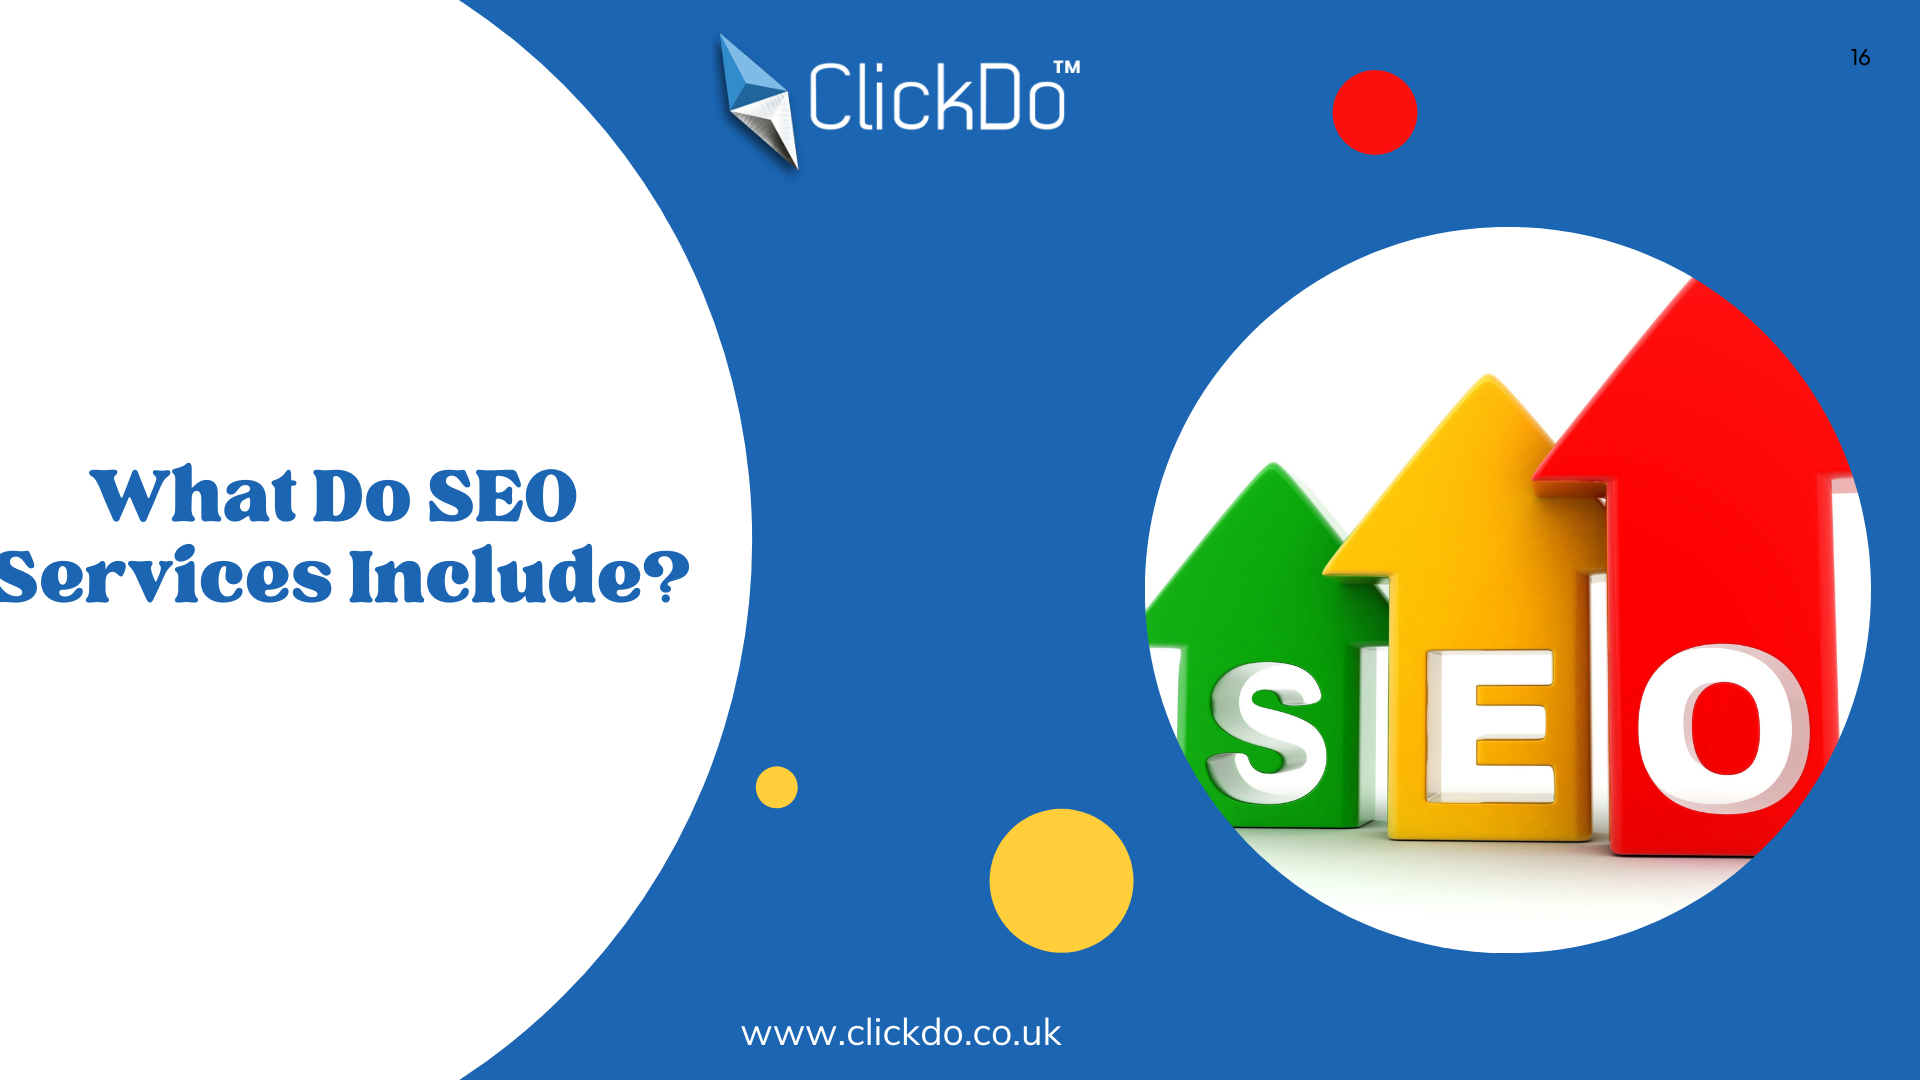 What Do SEO Services Include?